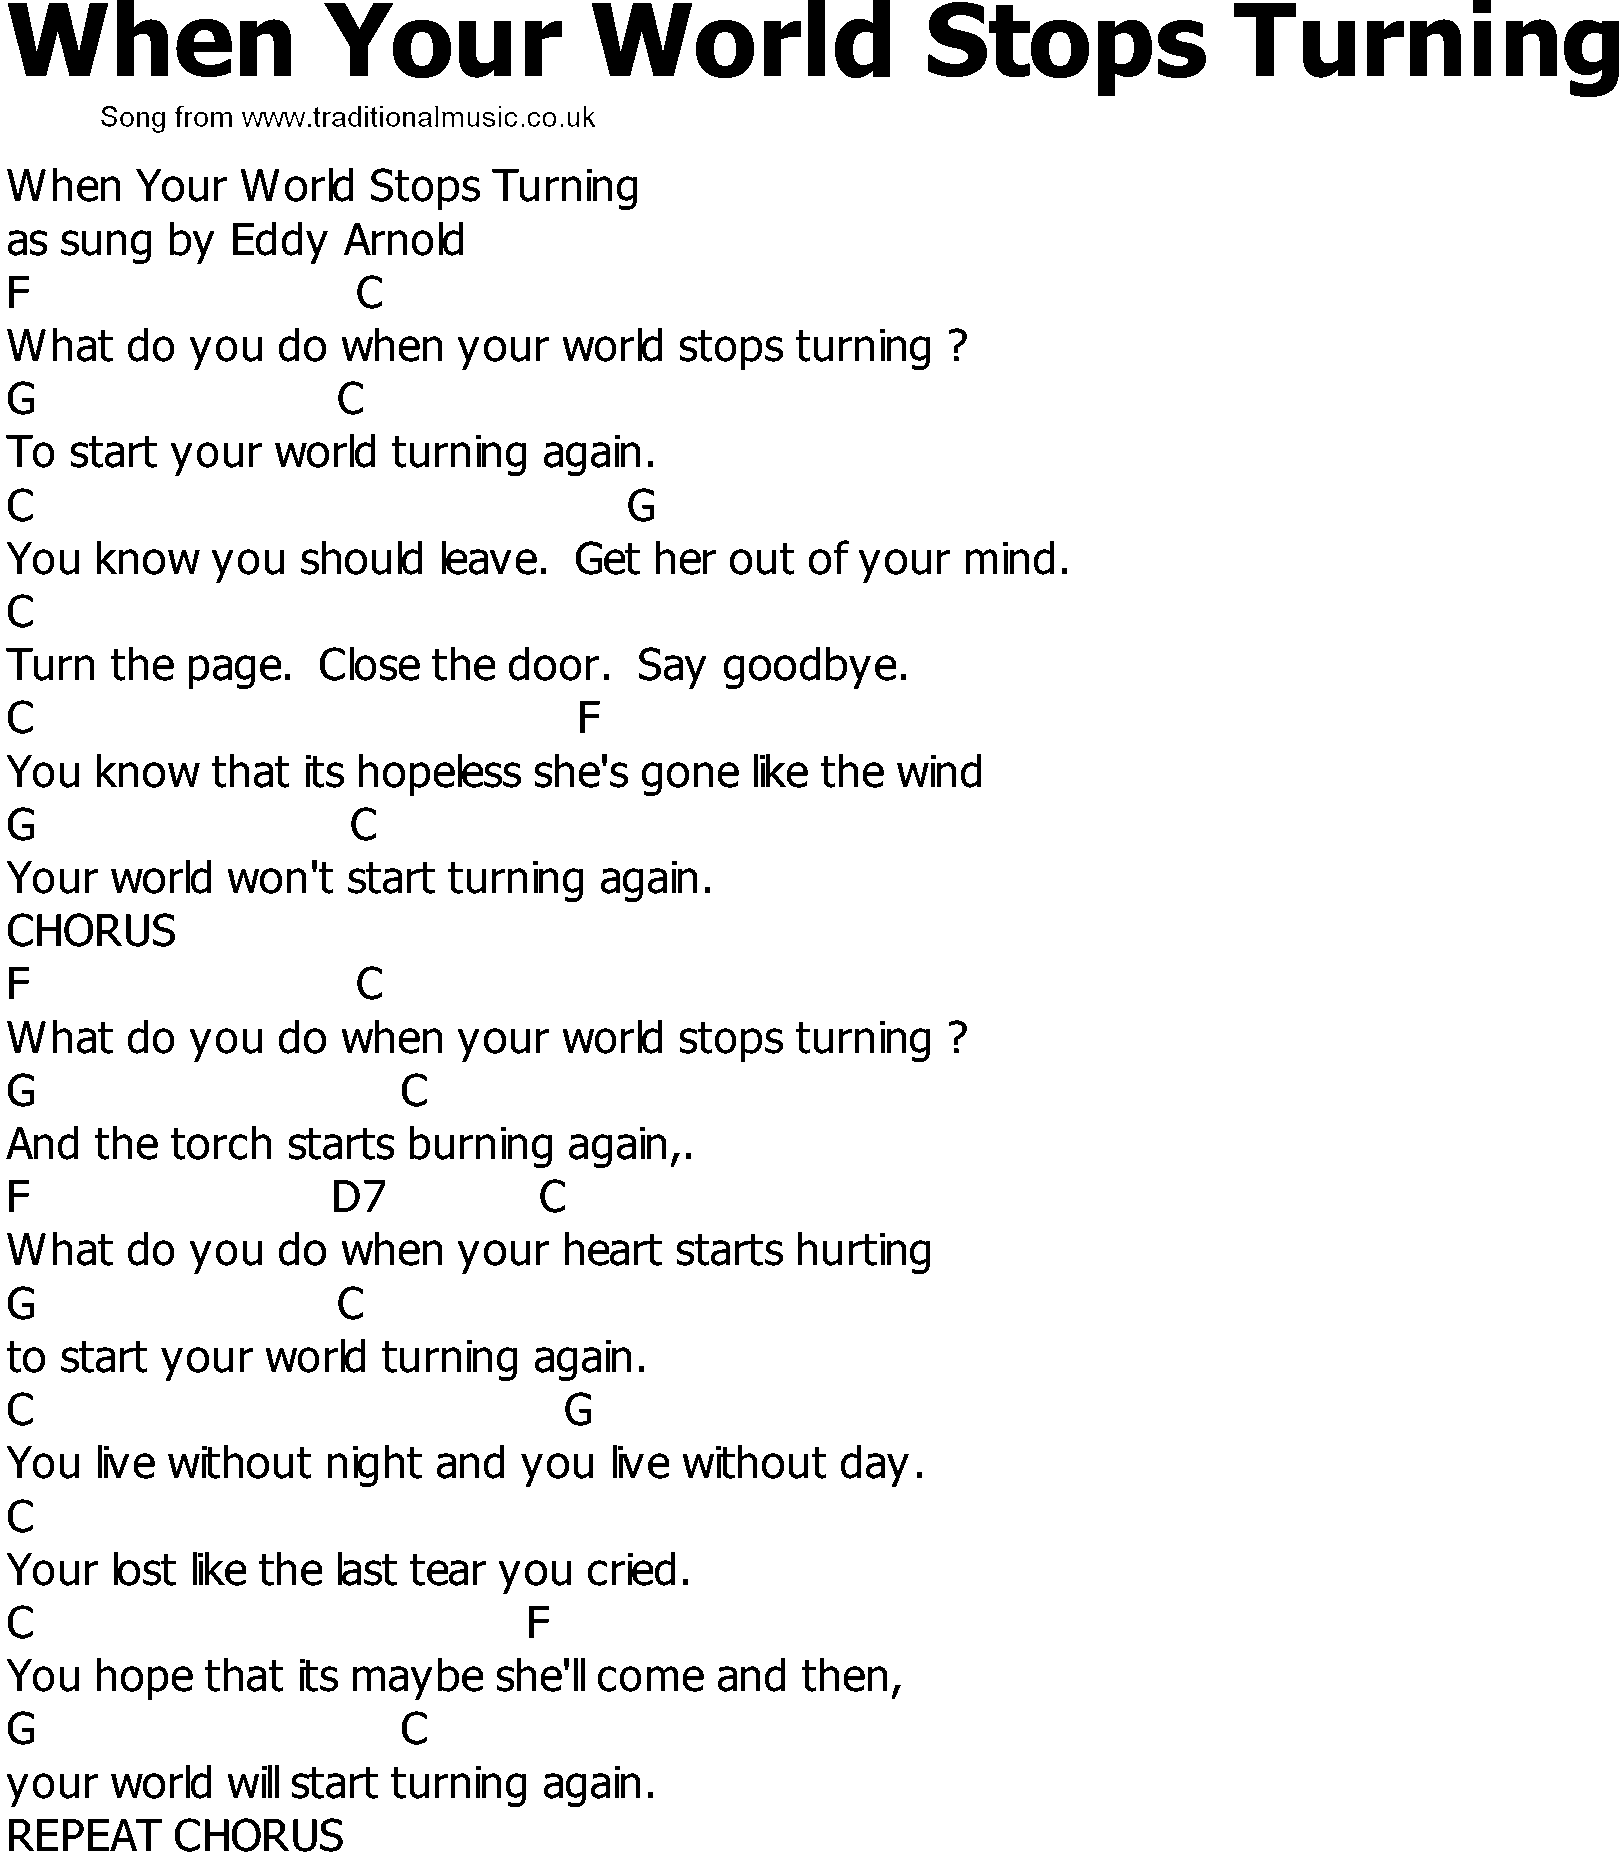 Old Country song lyrics with chords - When Your World Stops Turning